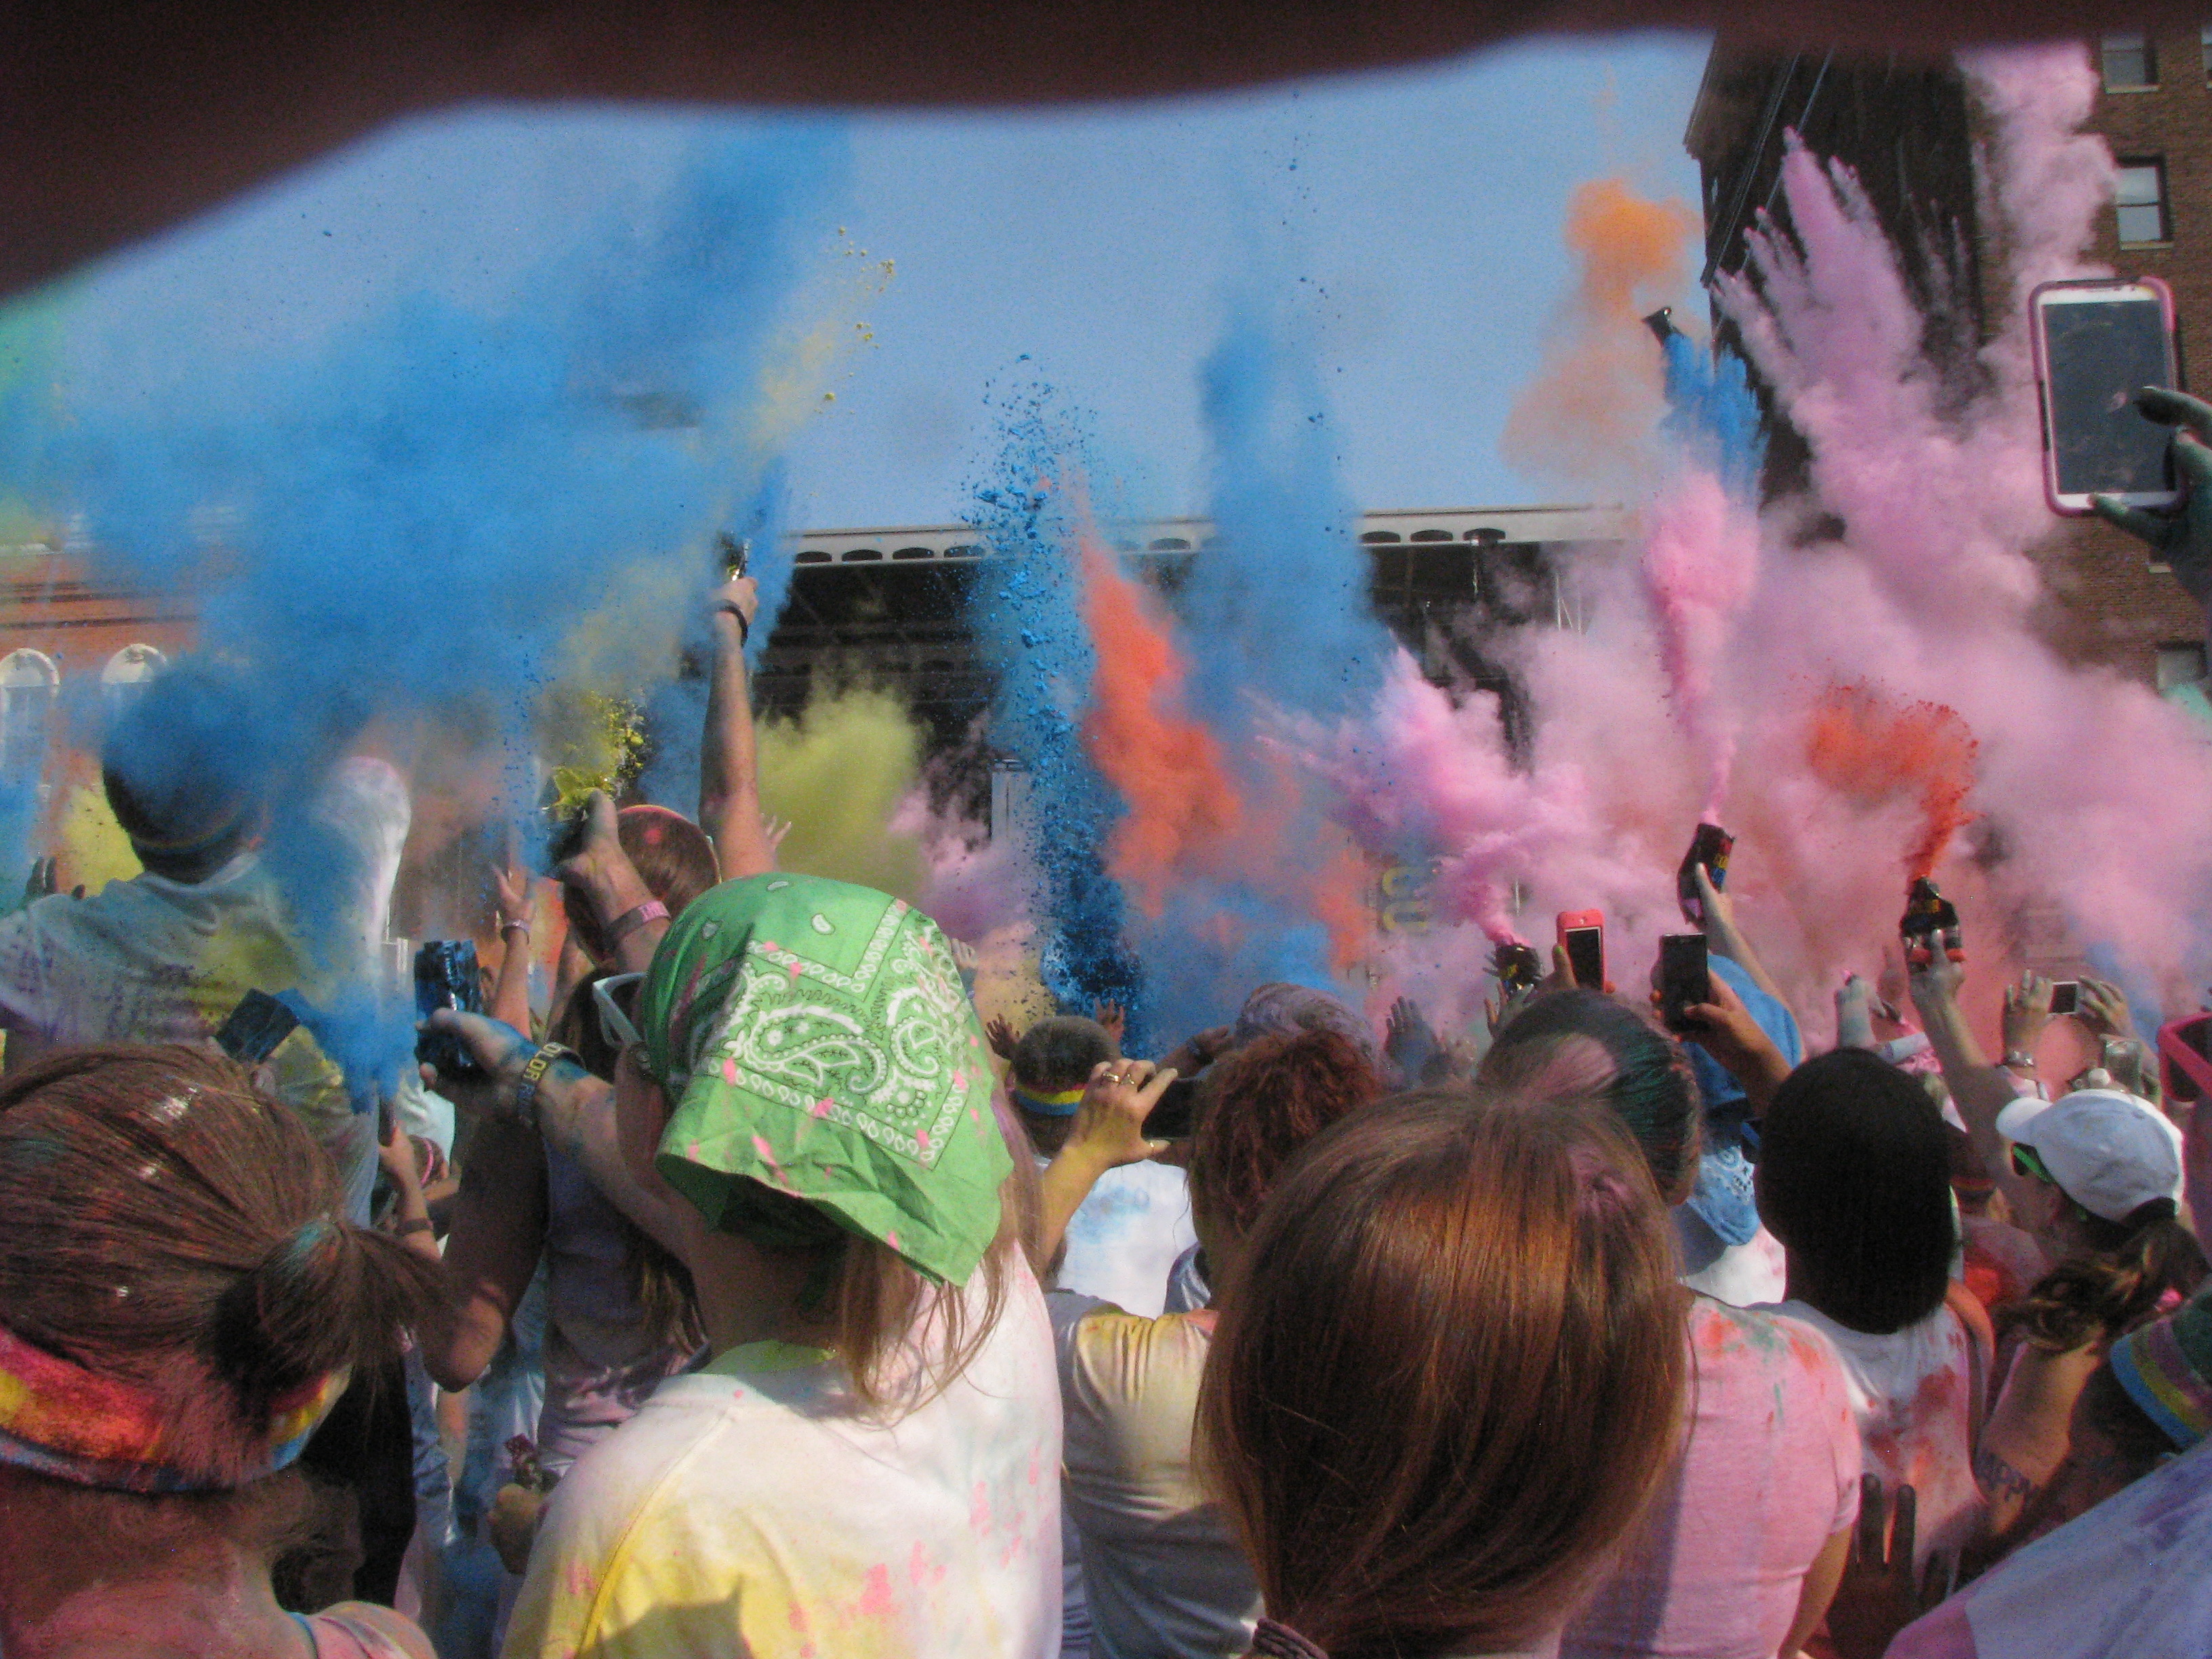 RunPhones had a great time at the Color Run Festival!